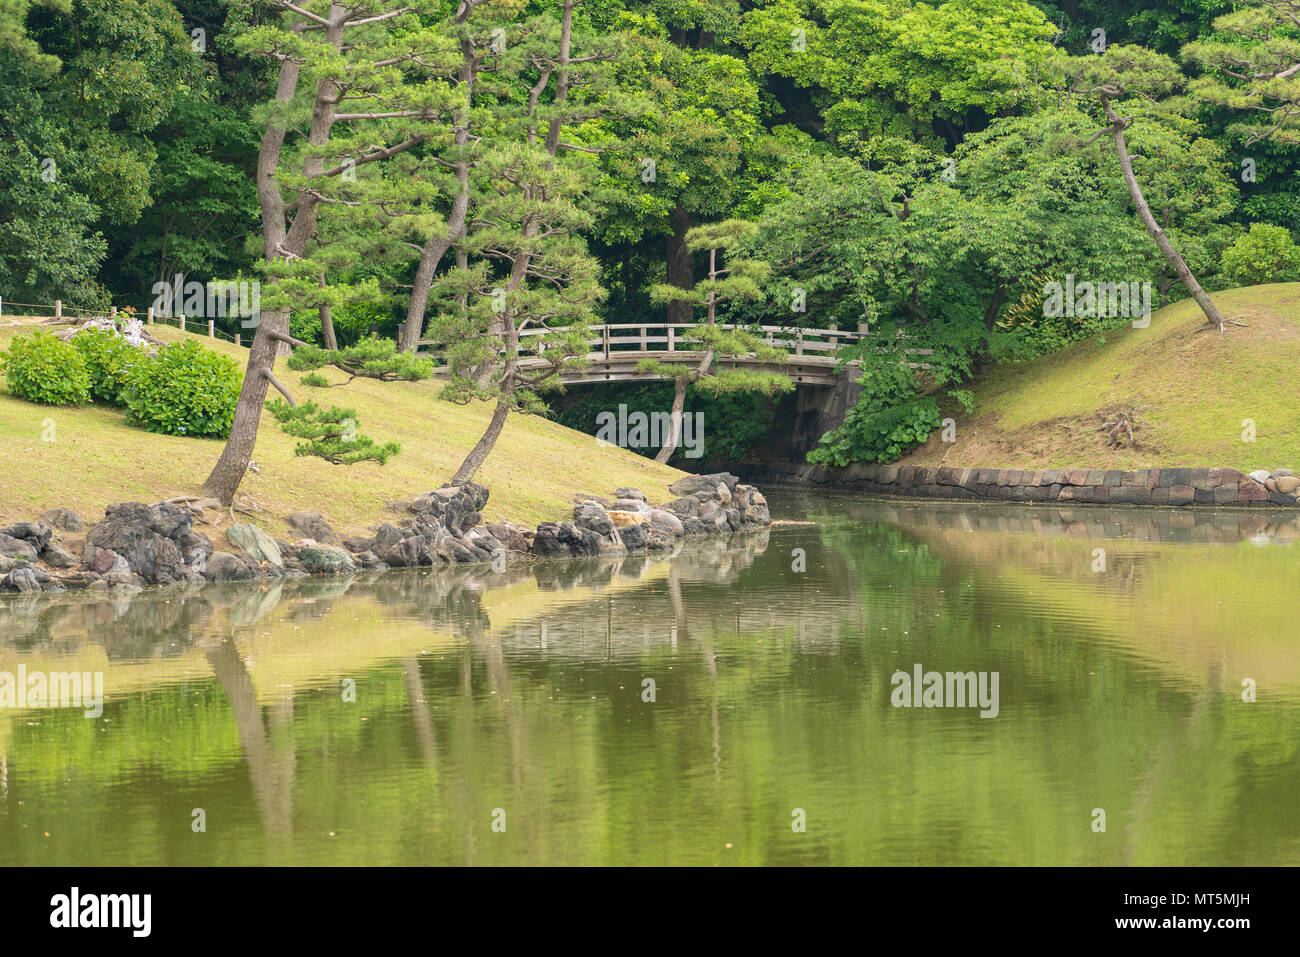 Hamarikyu Gardens in Tokyo are a popular spot for both tourists and locals.  This park has ponds, bridges and a Japanese tea house in its grounds. Stock Photo